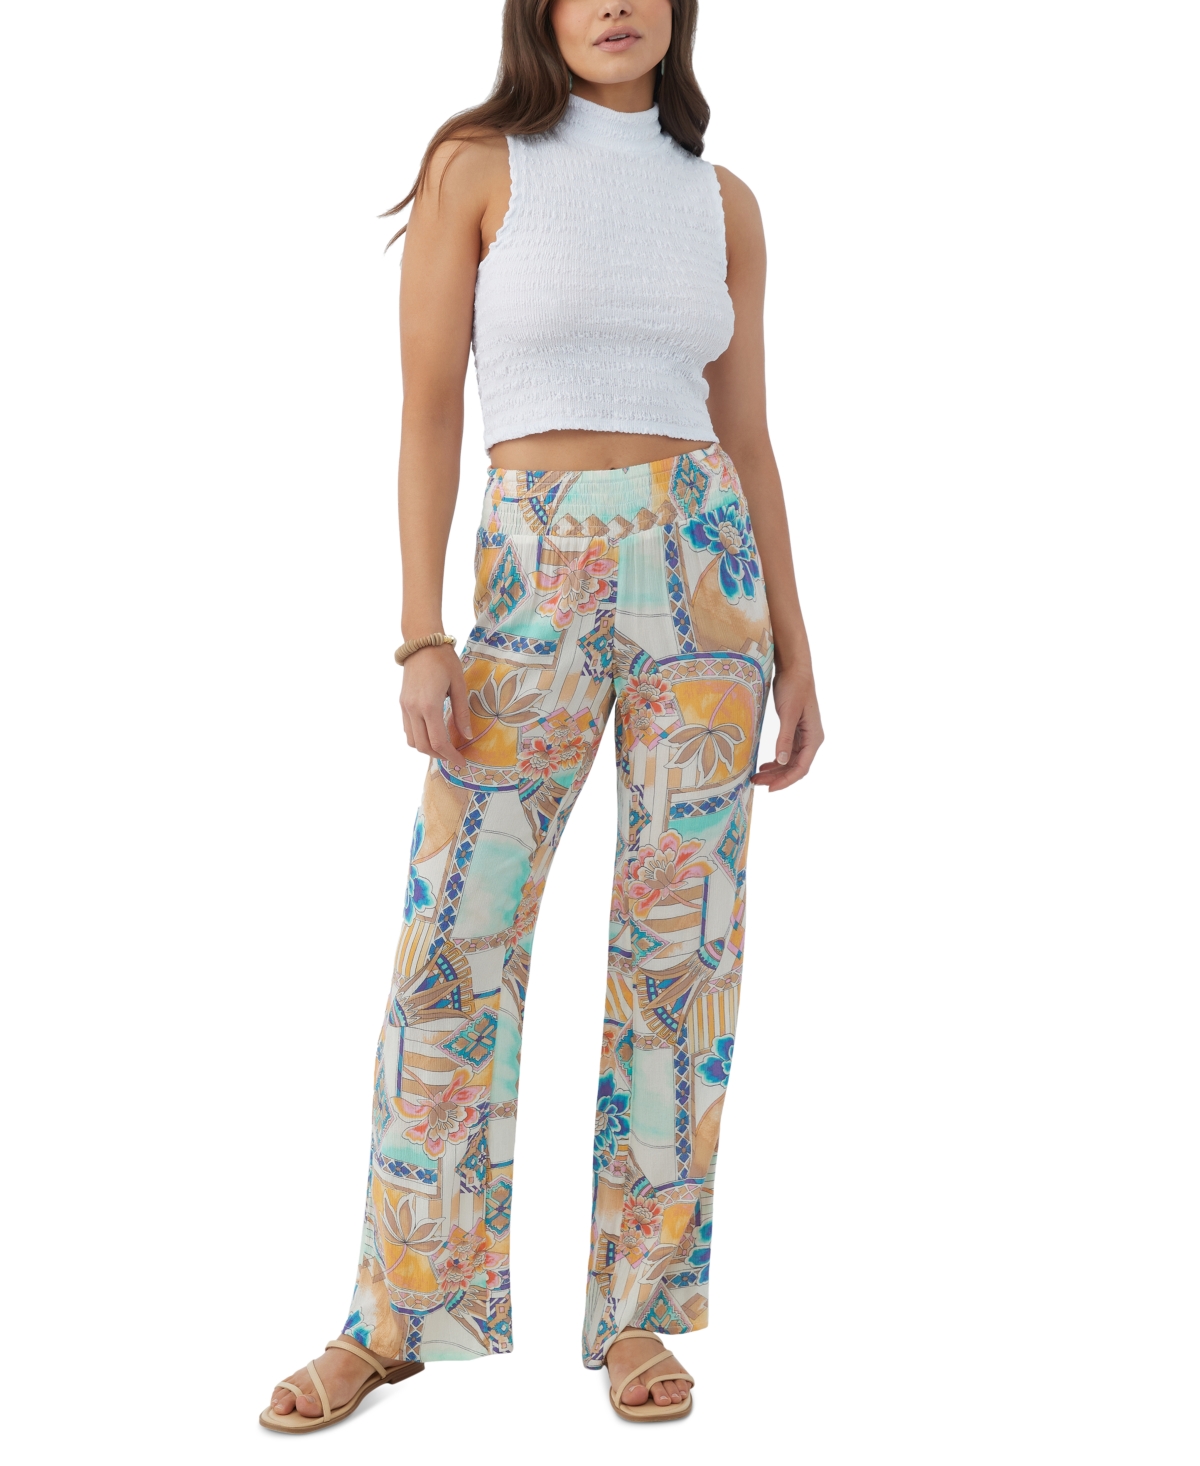 O'neill Juniors' Johnny Zephora Printed Pull-on Pants In Multi